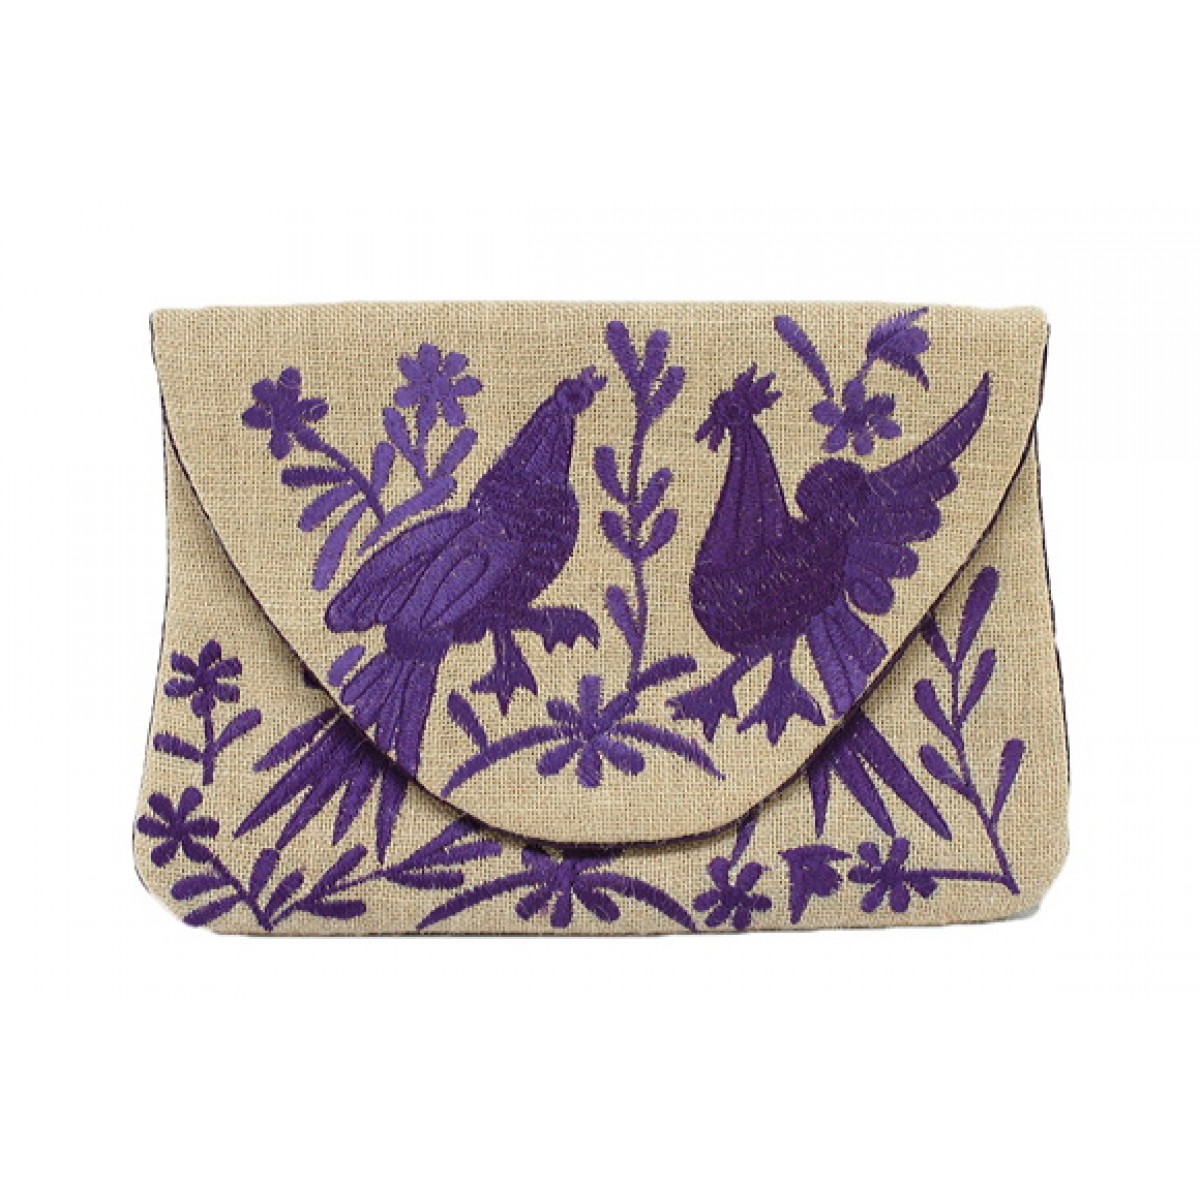 Jute Clutch With Embroidered Birds 